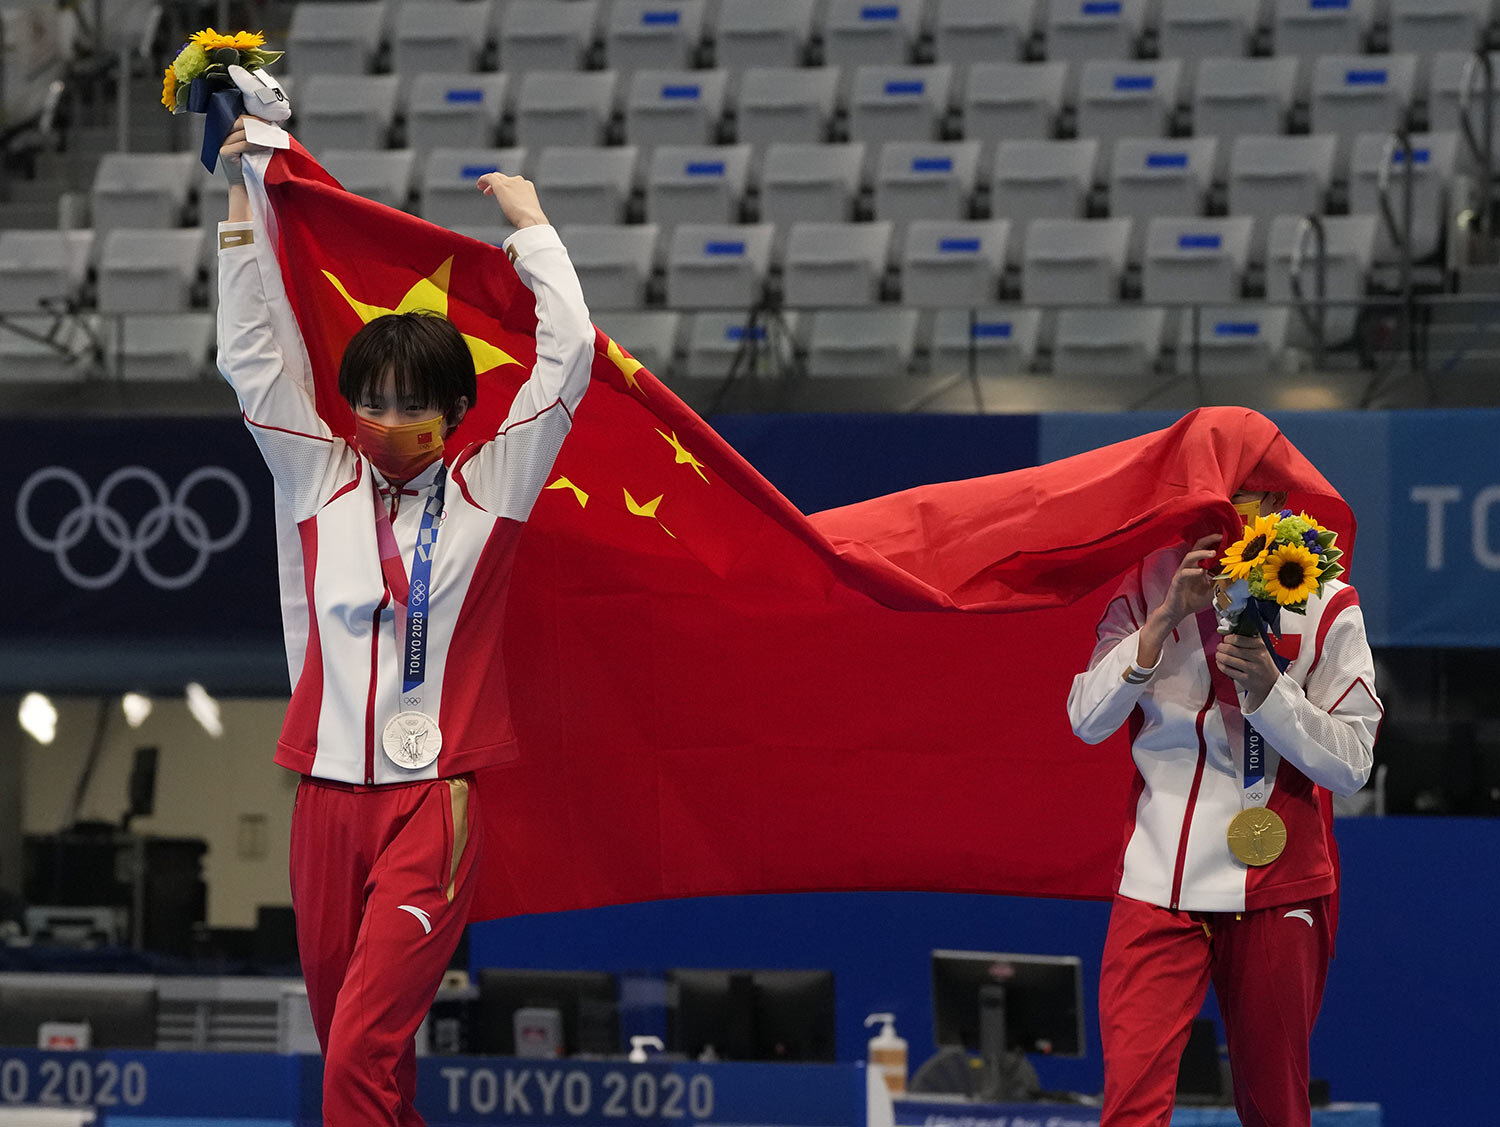  Chen Yuxi of China, left, silver medal and Quan Hongchan of China, gold medal react after winning gold medal in women's diving 10m platform final at the Tokyo Aquatics Centre at the 2020 Summer Olympics, Thursday, Aug. 5, 2021, in Tokyo, Japan. (AP 